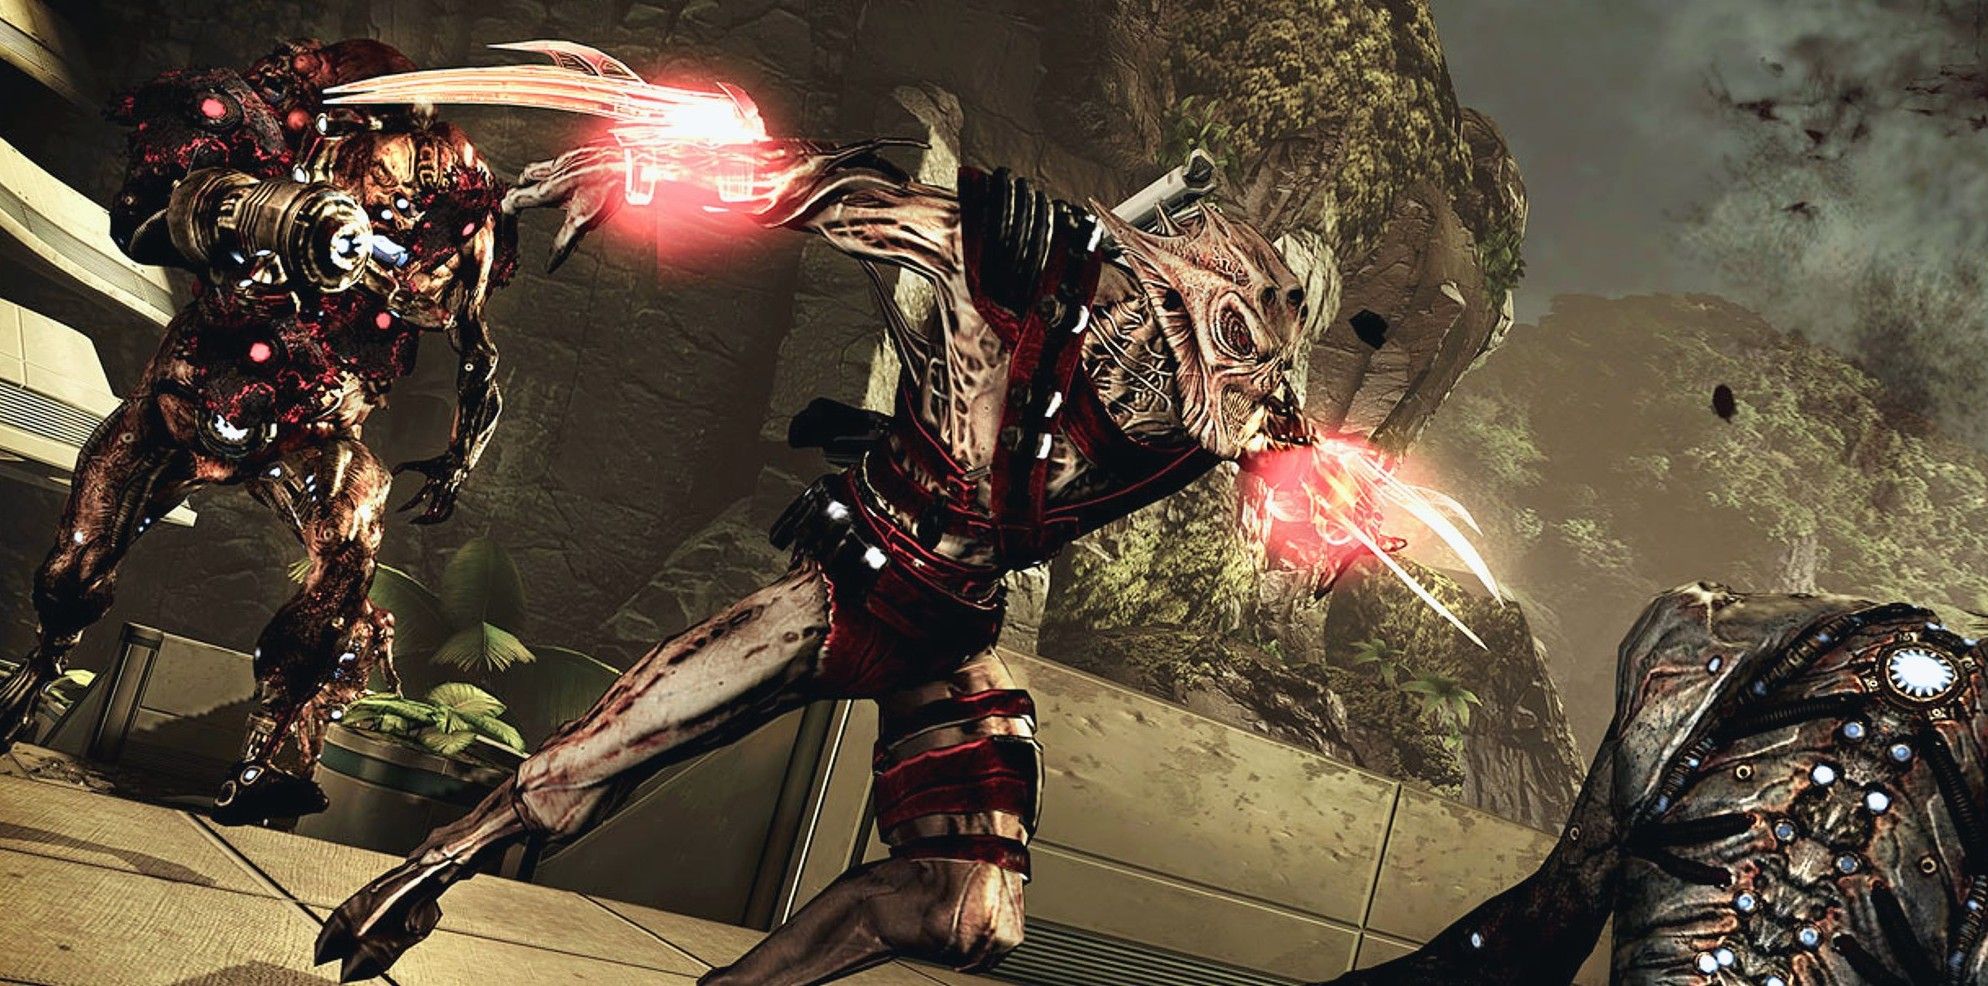 Mass Effect 3 Multiplayer As Vorcha Against The Reapers